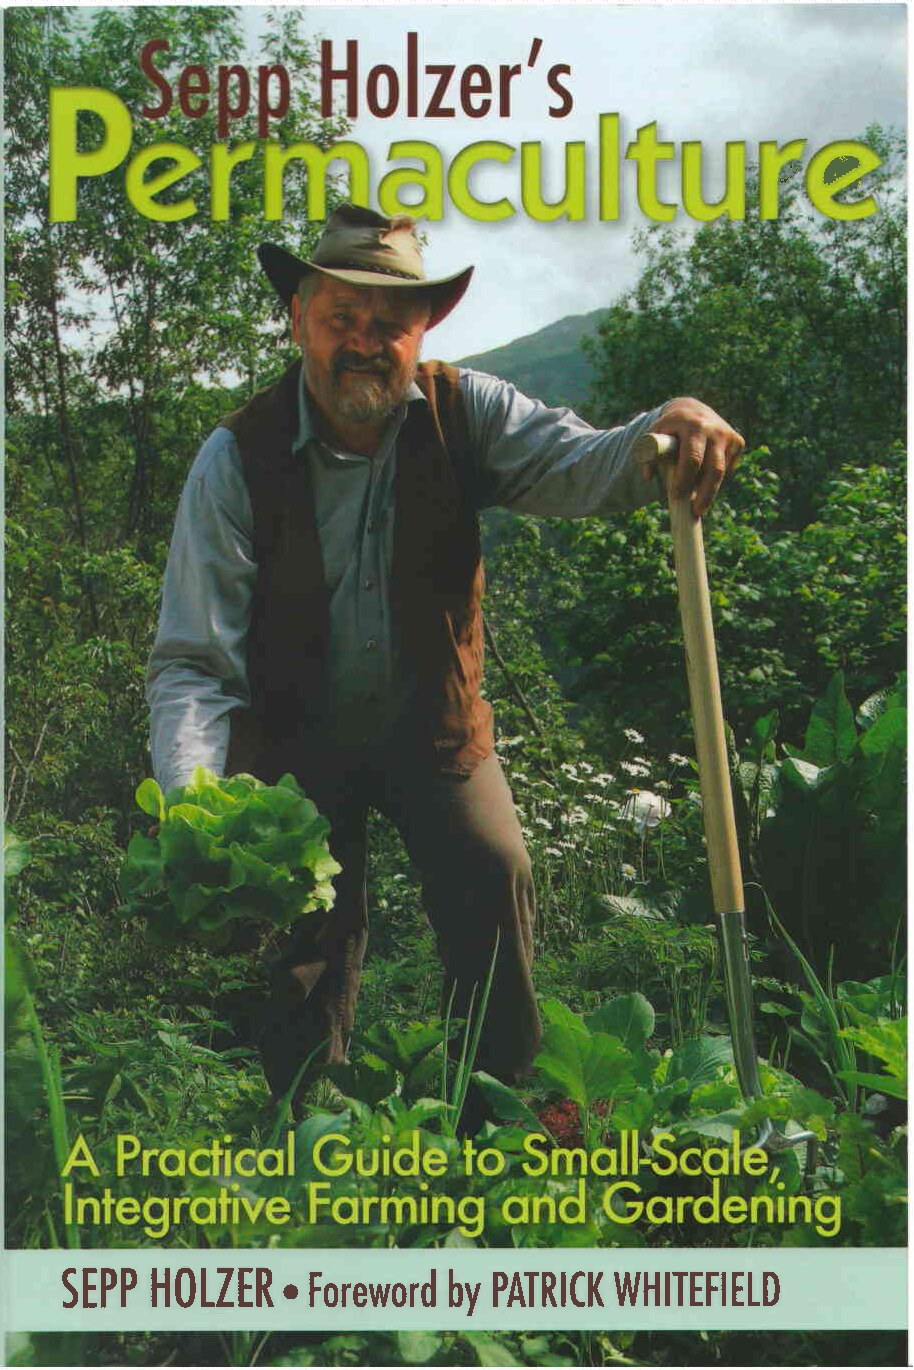 Holzer, Sepp; Permaculture; A Practical Guide to Small-Scale, Integrative Farming and Gardening